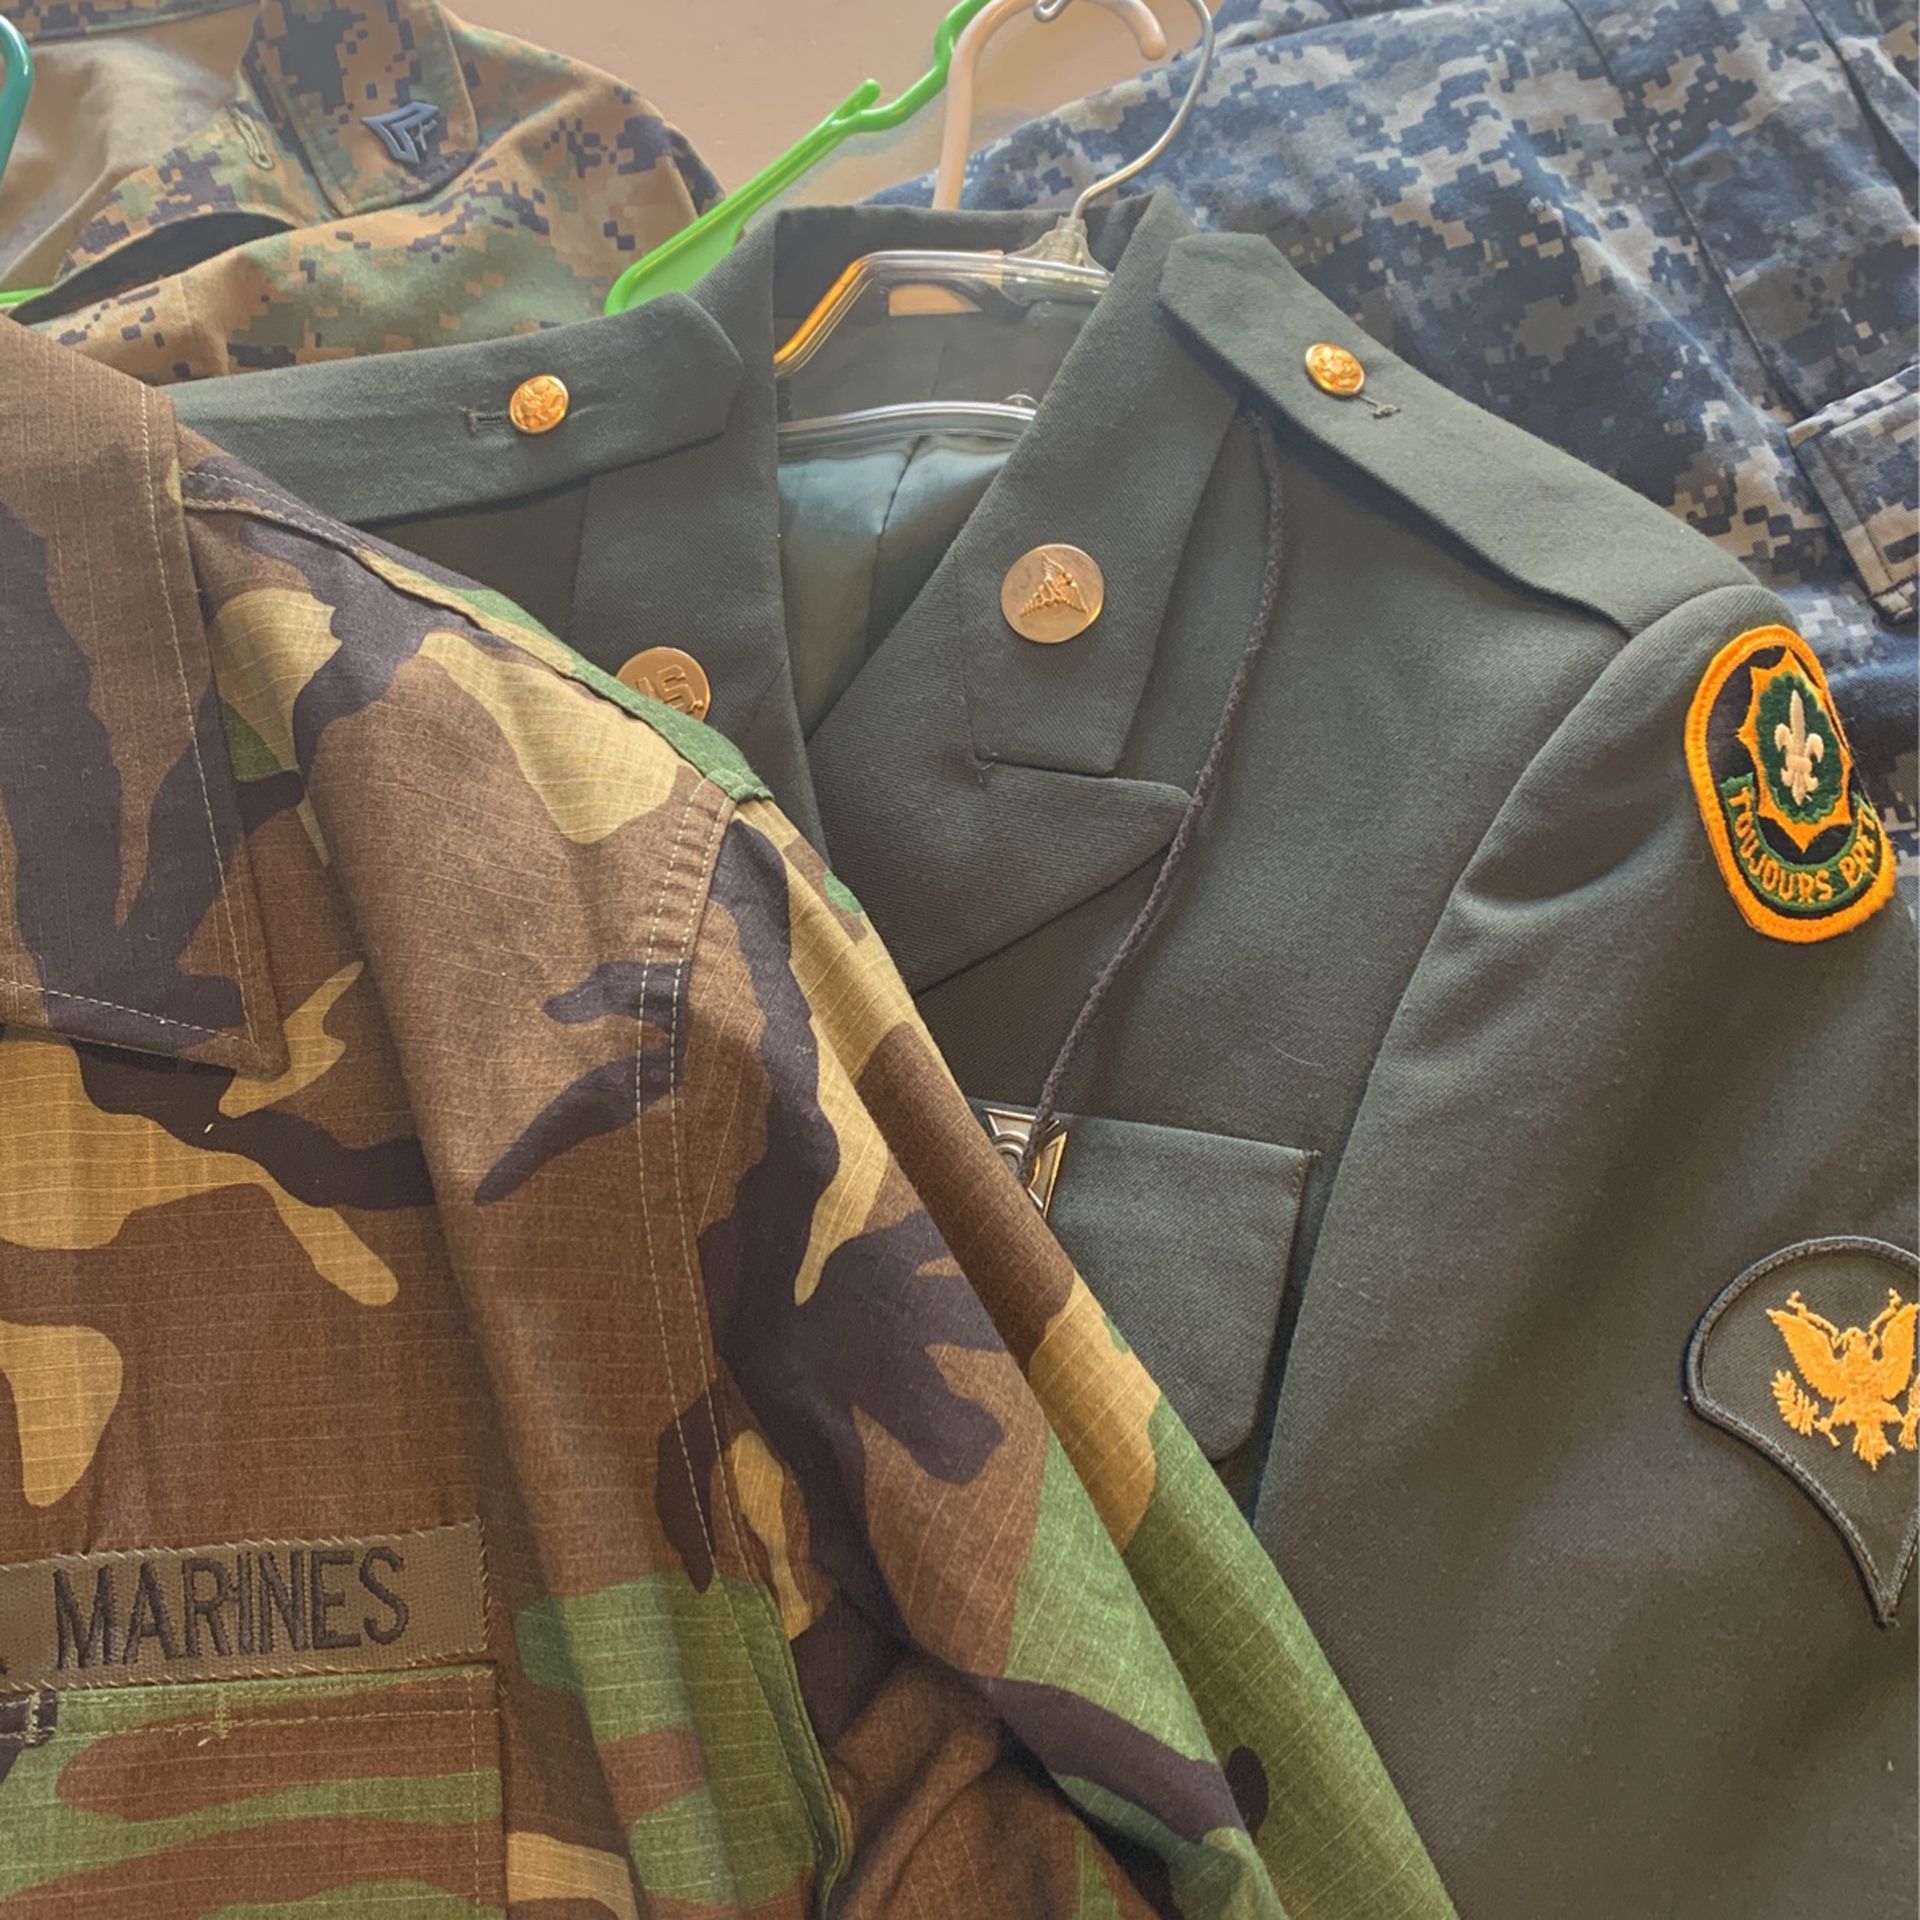 11 Marine Navy Army Military Shirts Jackets And 6 Camo Pants With Medals